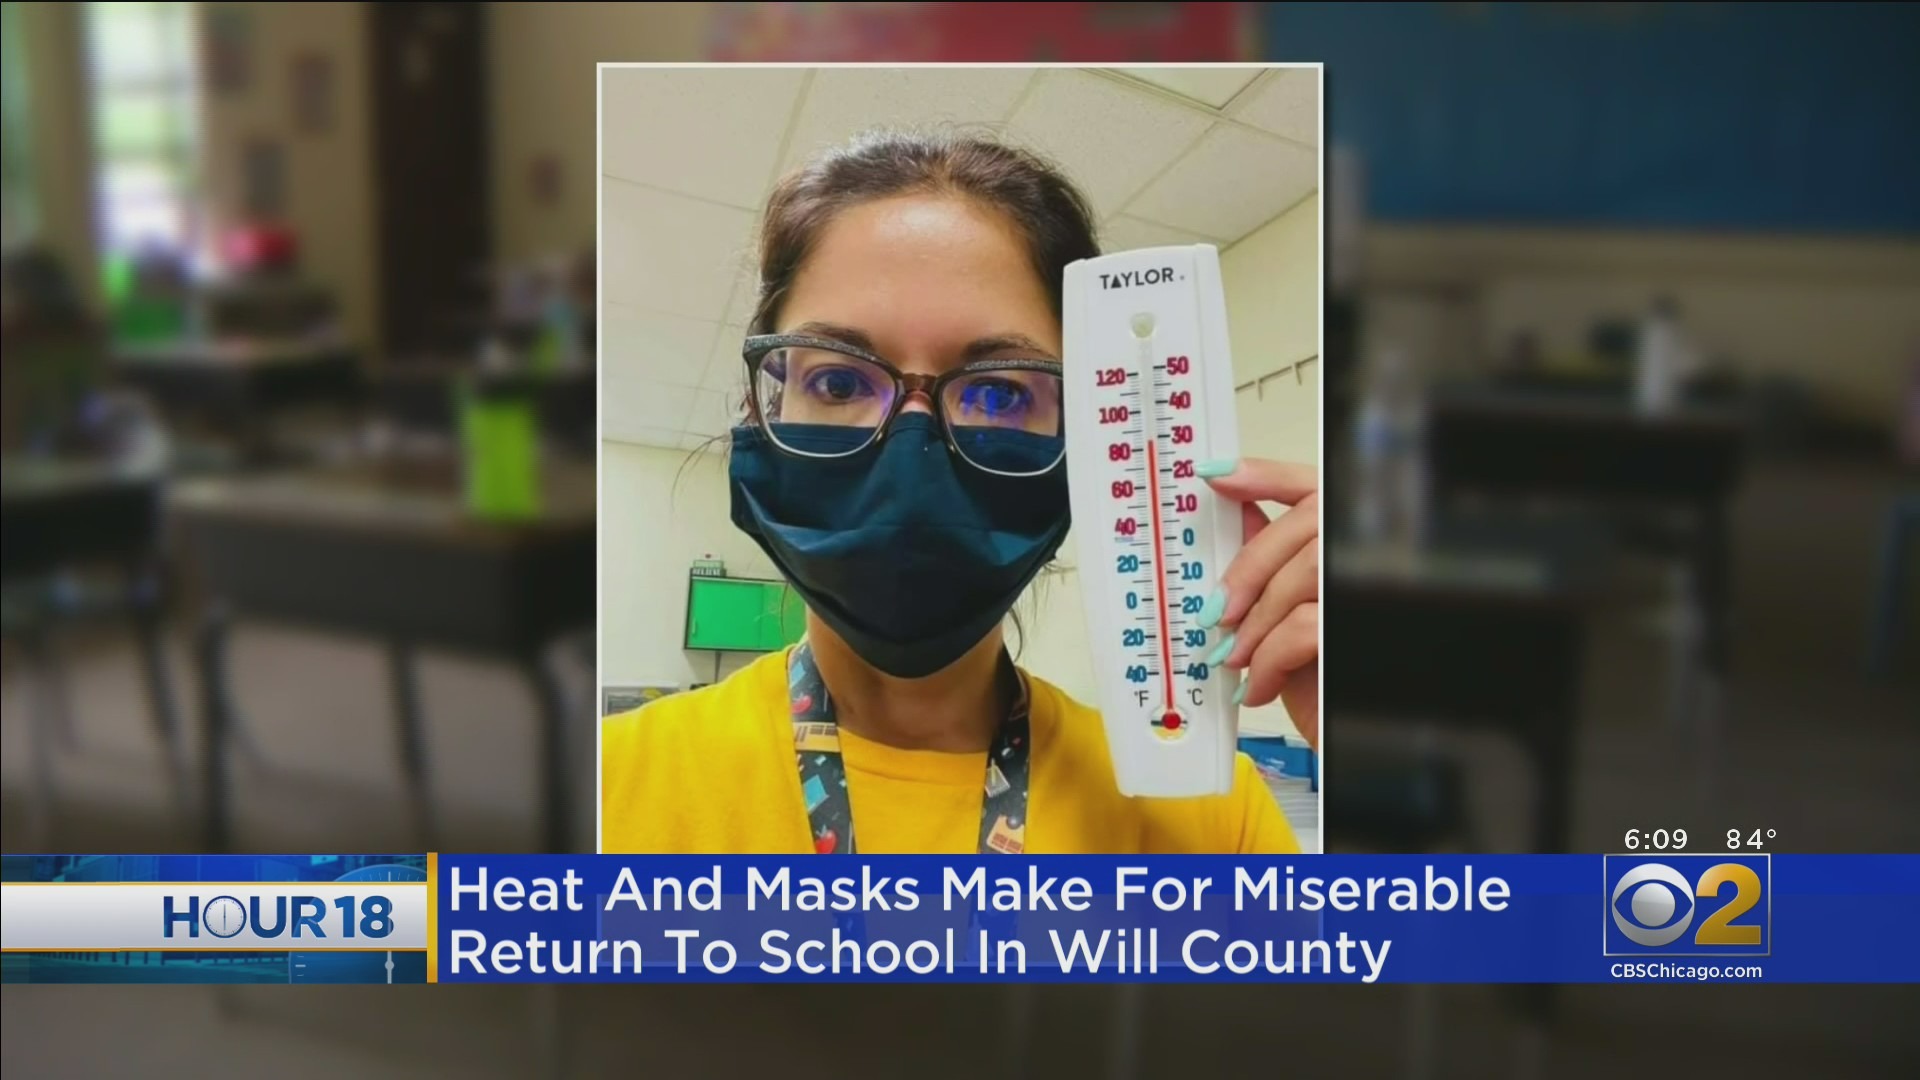 Heat And Masks Without Air Conditioning Make For Miserable Return To School In Will County – CBS Chicago